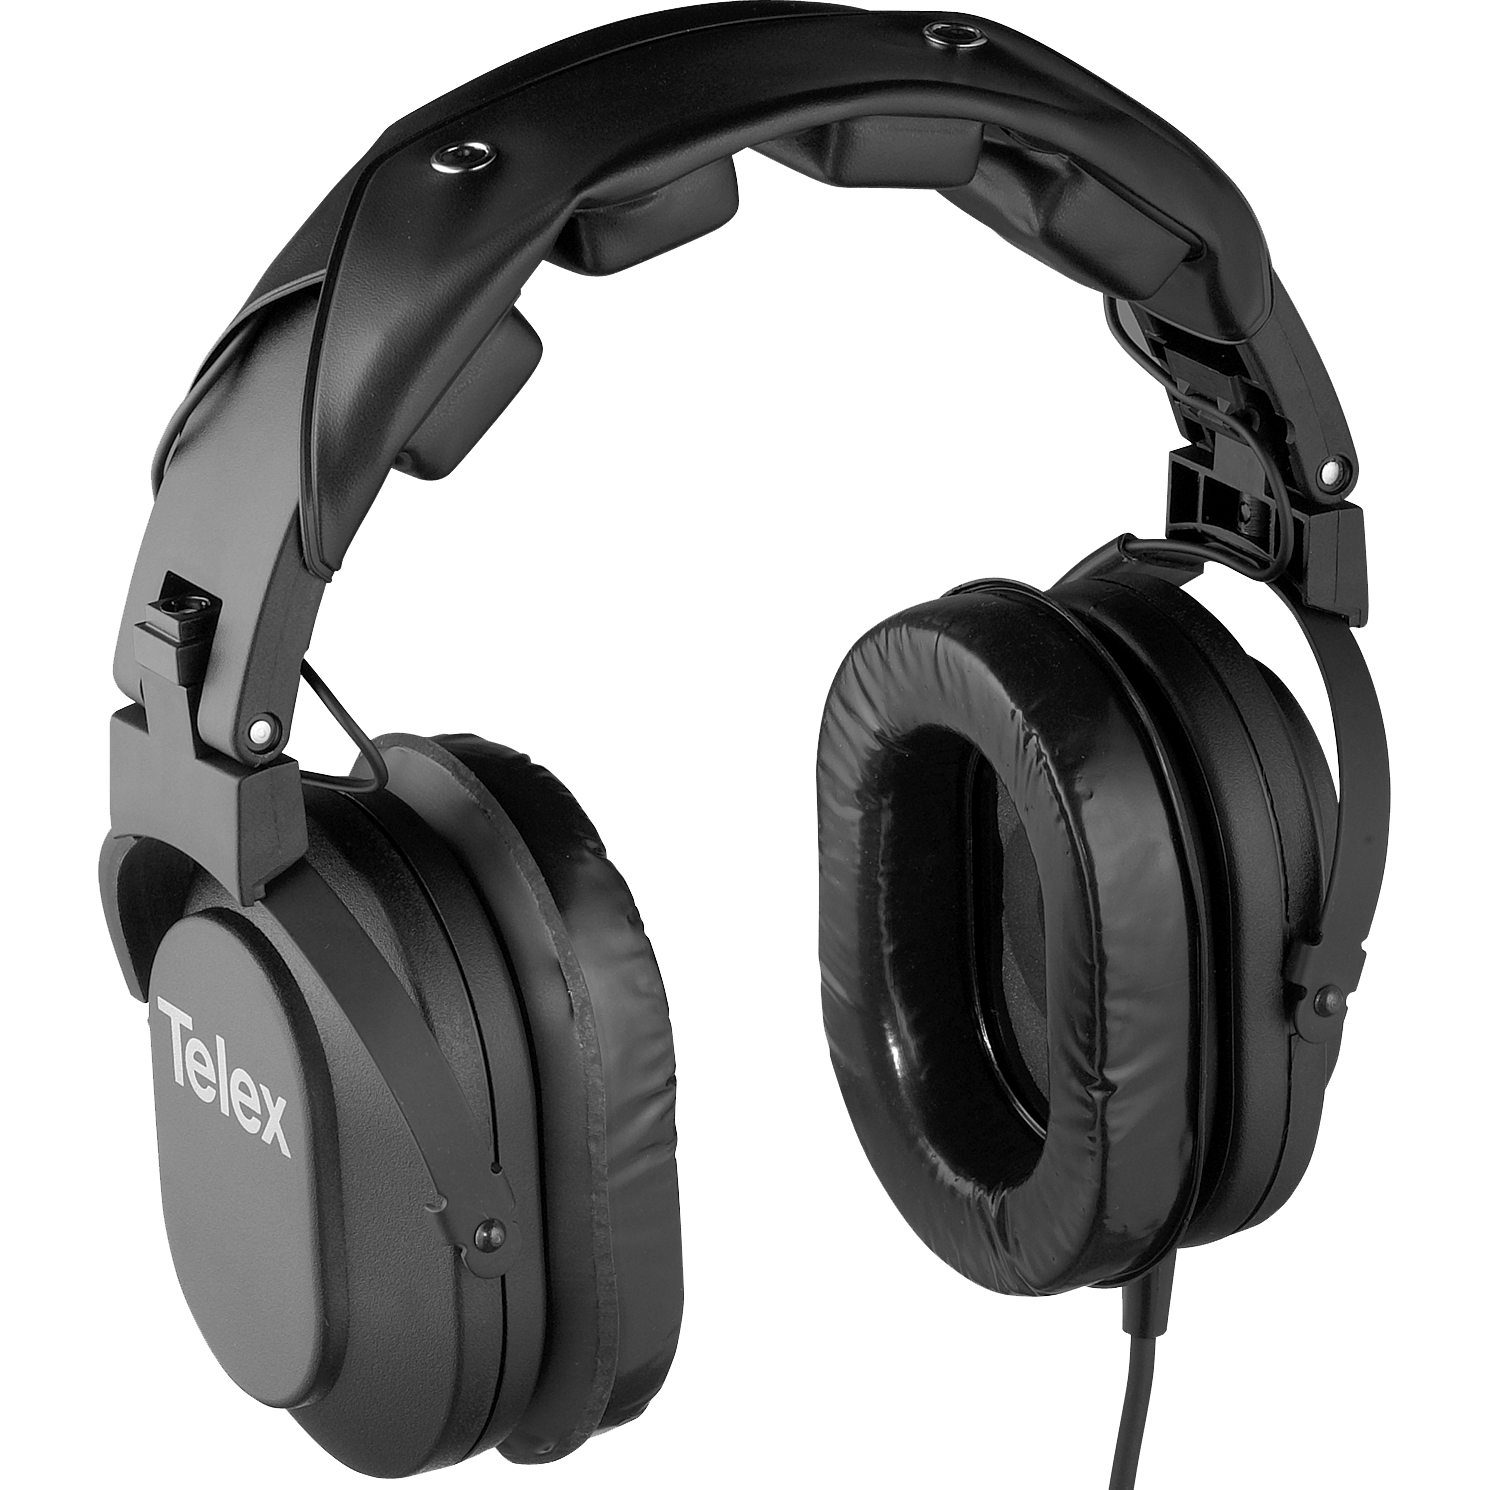 Headphones Picture PNG Image